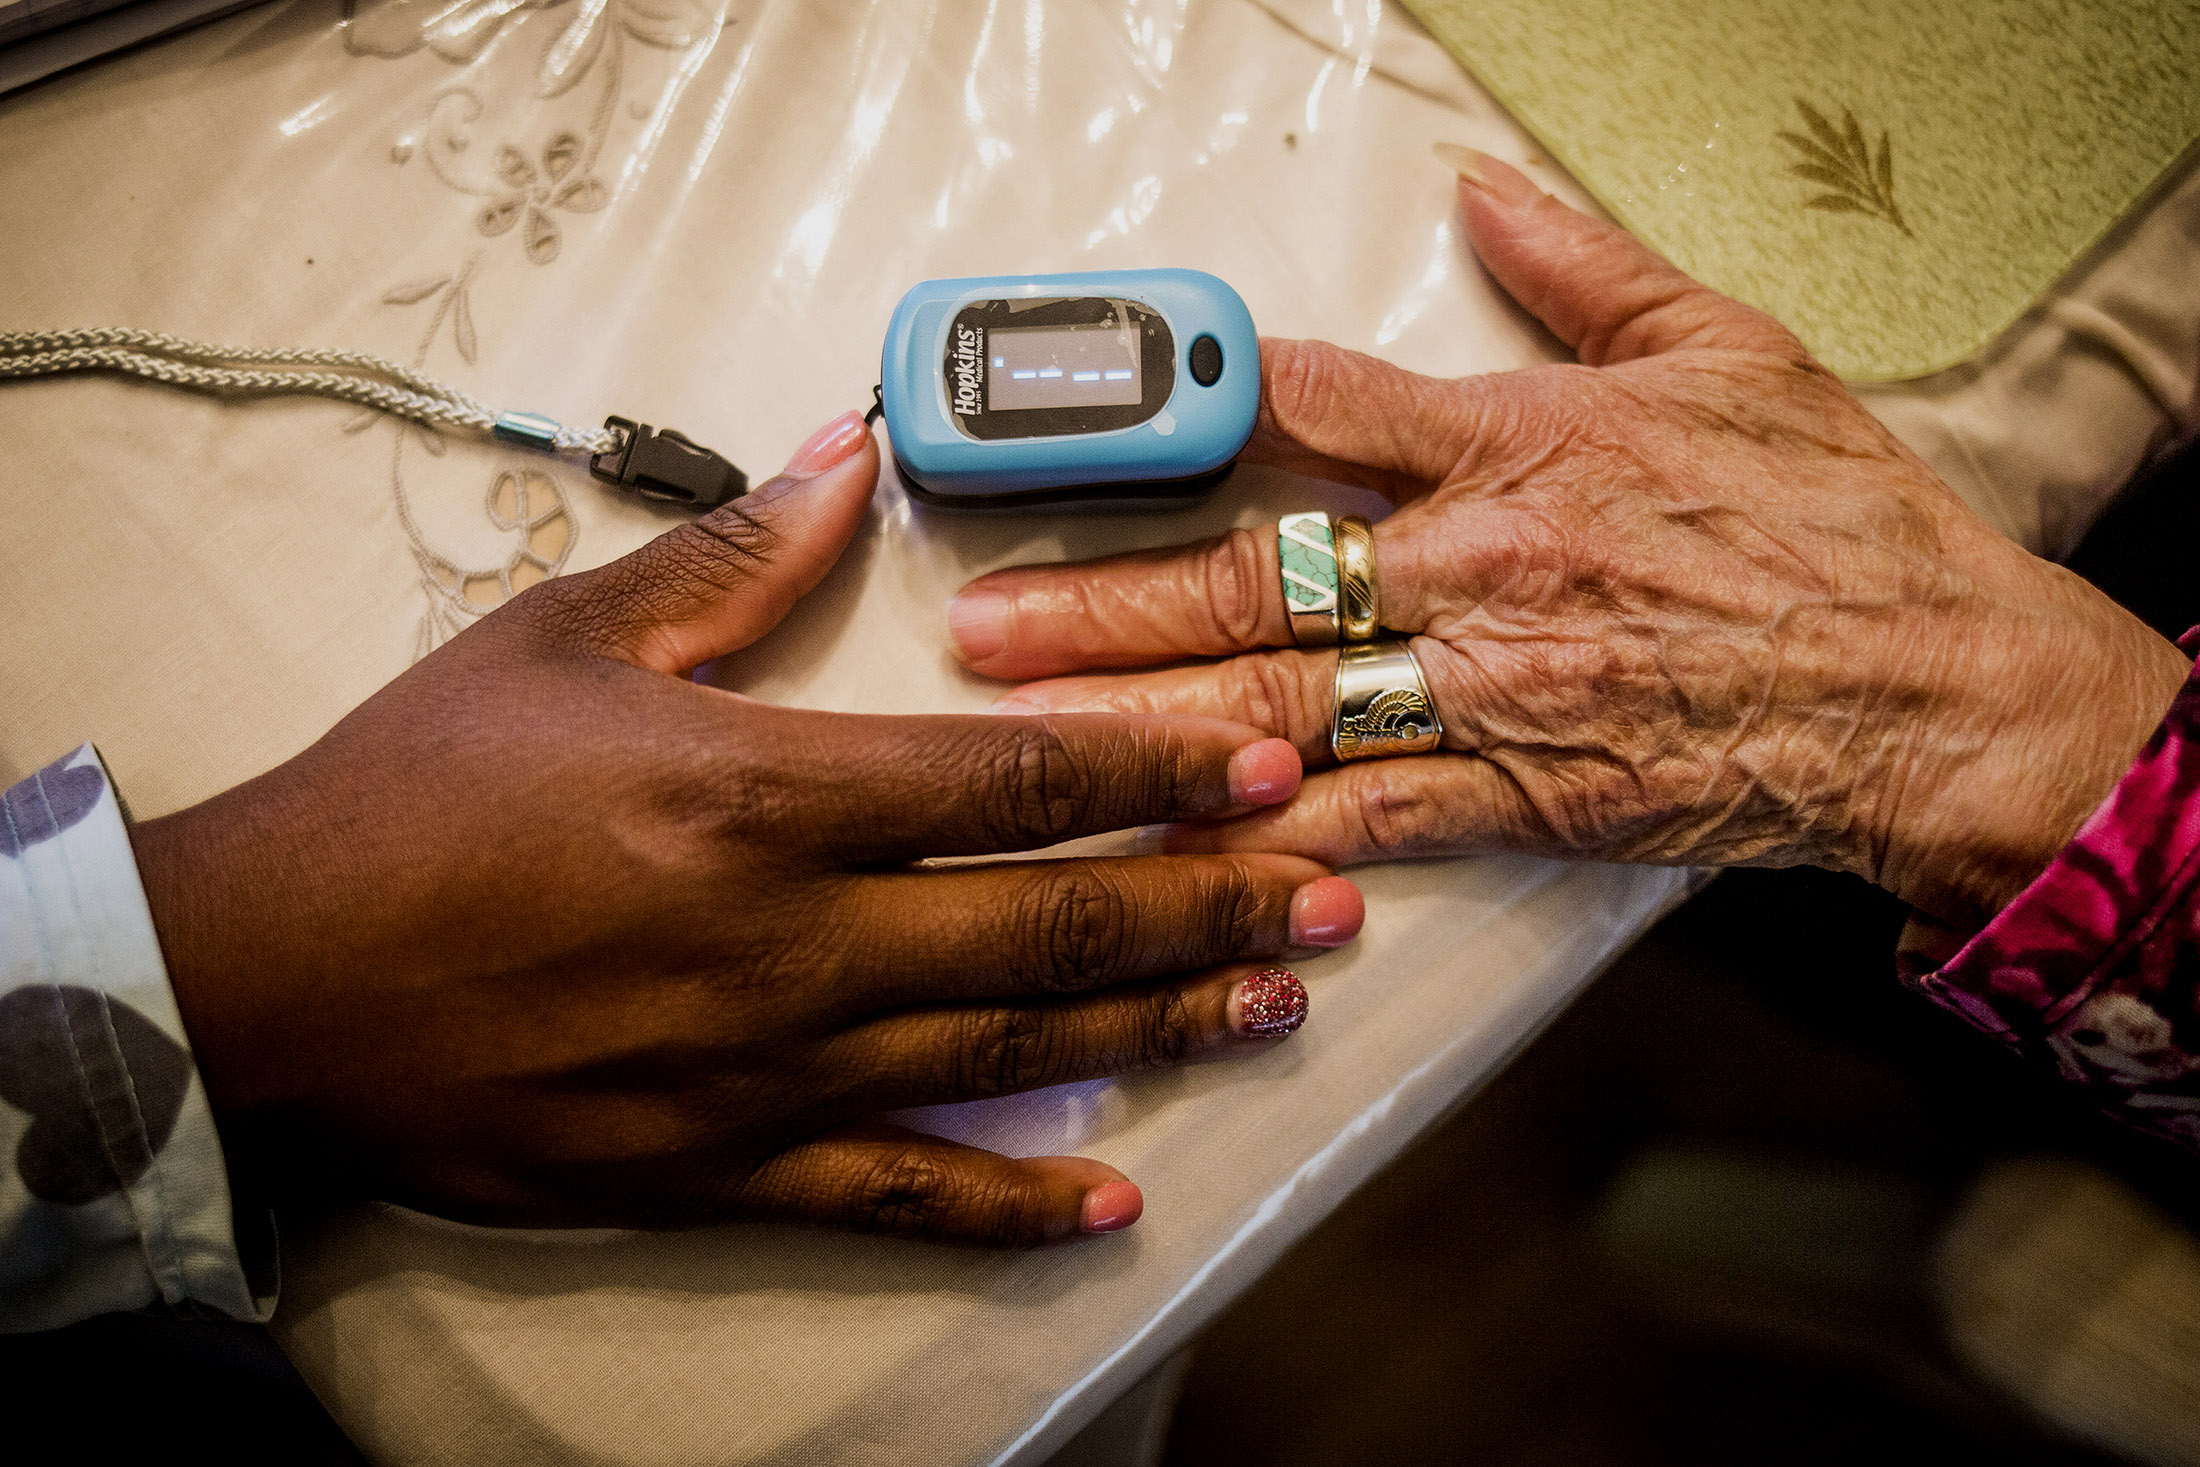 Margarita Varon has her heart rate taken by Clover Health Care nurse, Nakesha McPherson at her home in Plainfield, New Jersey, U.S., on Wednesday, October 26, 2016. John Taggart/Bloomberg